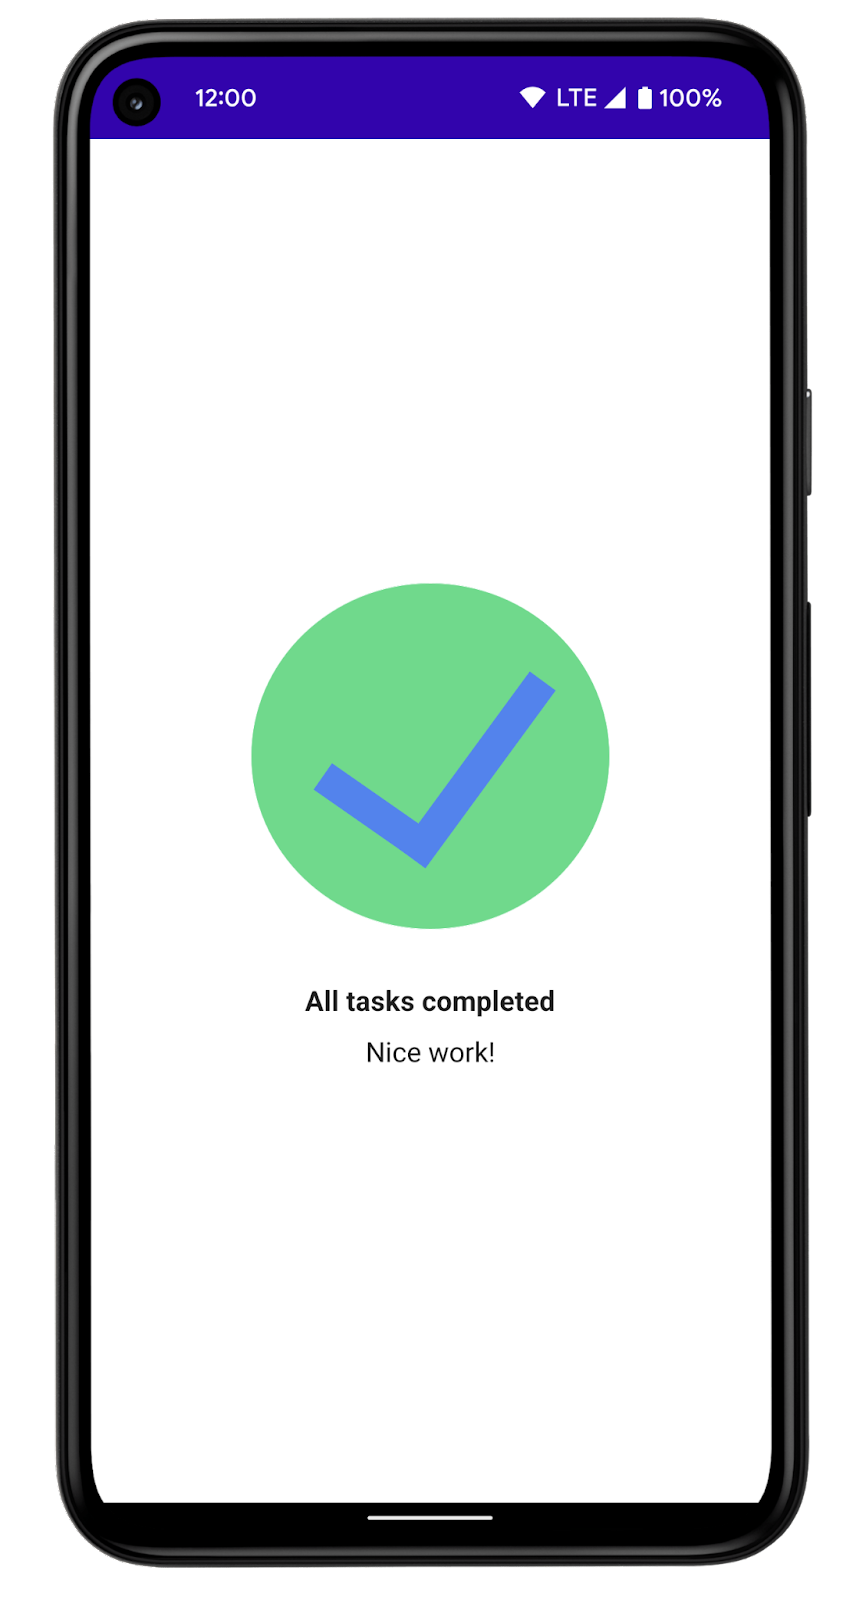 The app displays an All tasks completed screen.